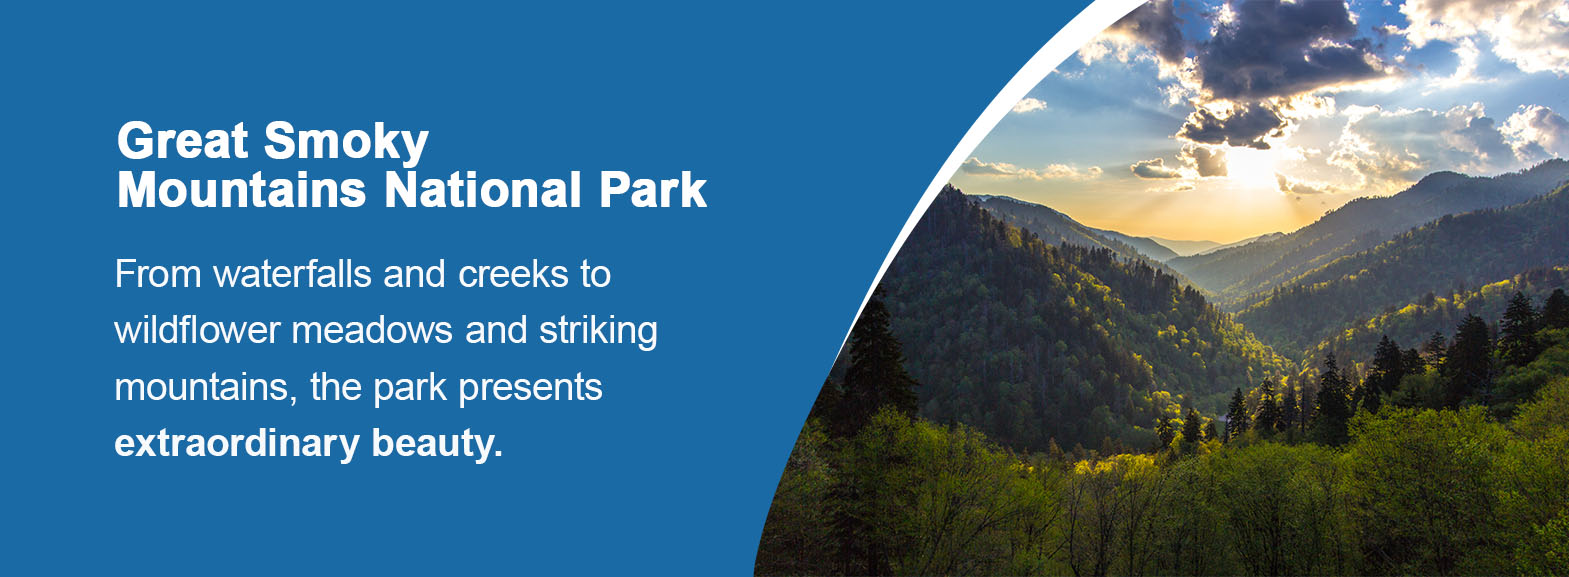 Great Smoky Mountains National Park. From waterfalls and creeks to wildflower meadows and striking mountains, the park presents extraordinary beauty.